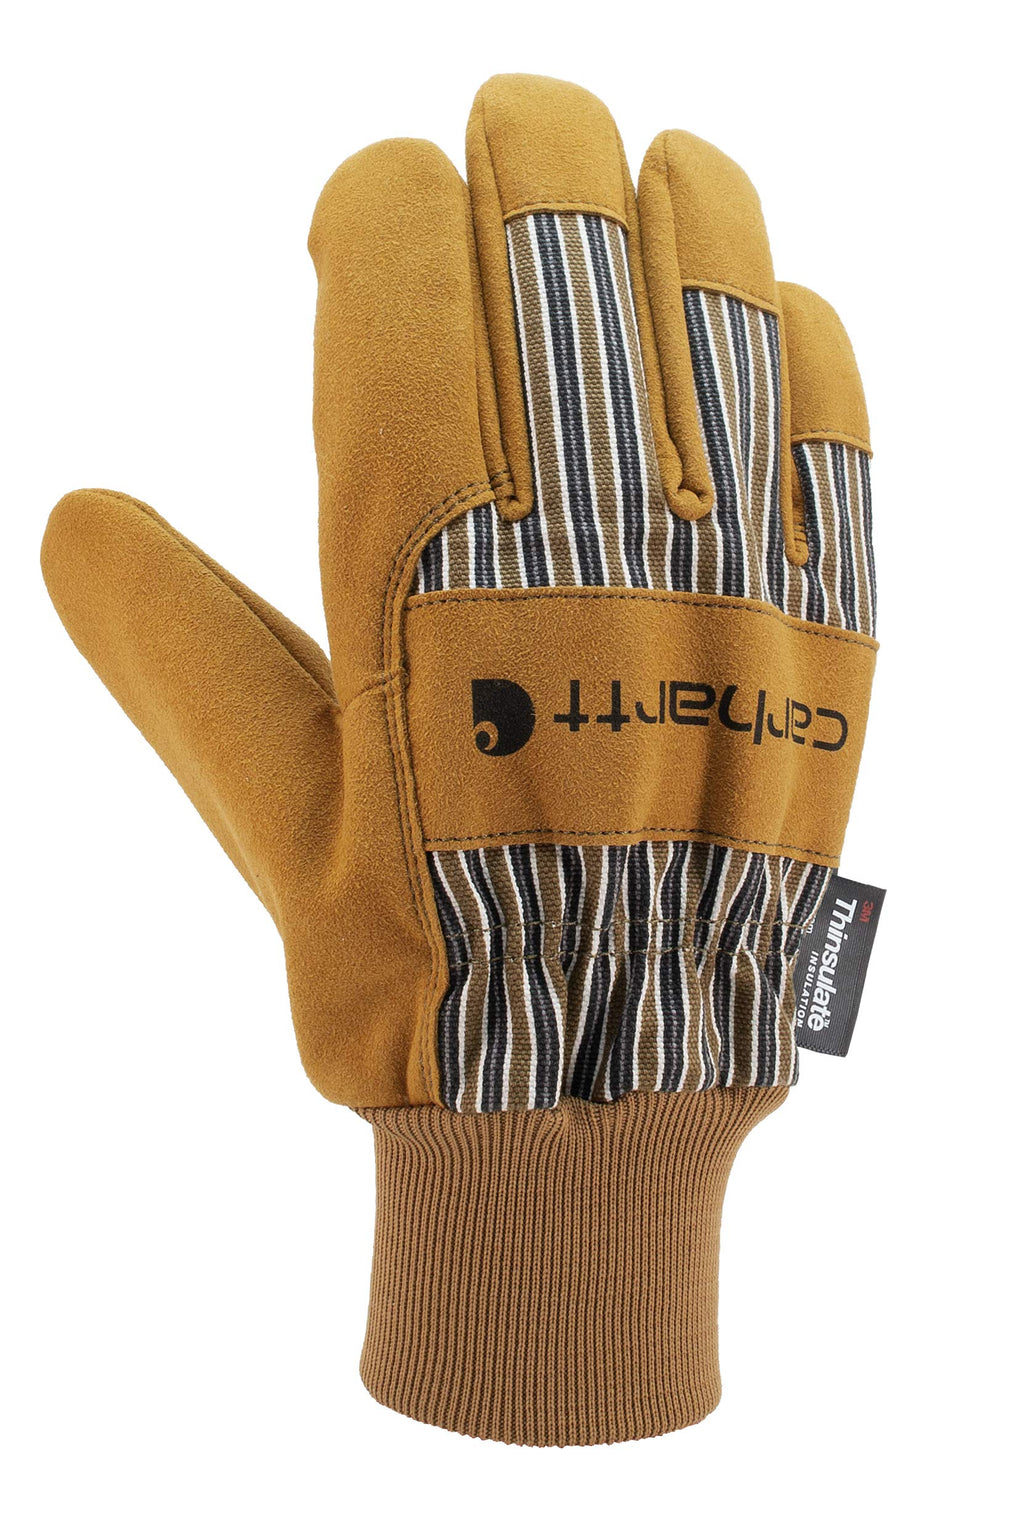 [Australia] - Carhartt Men's Insulated Suede Work Glove with Knit Cuff Small Brown 